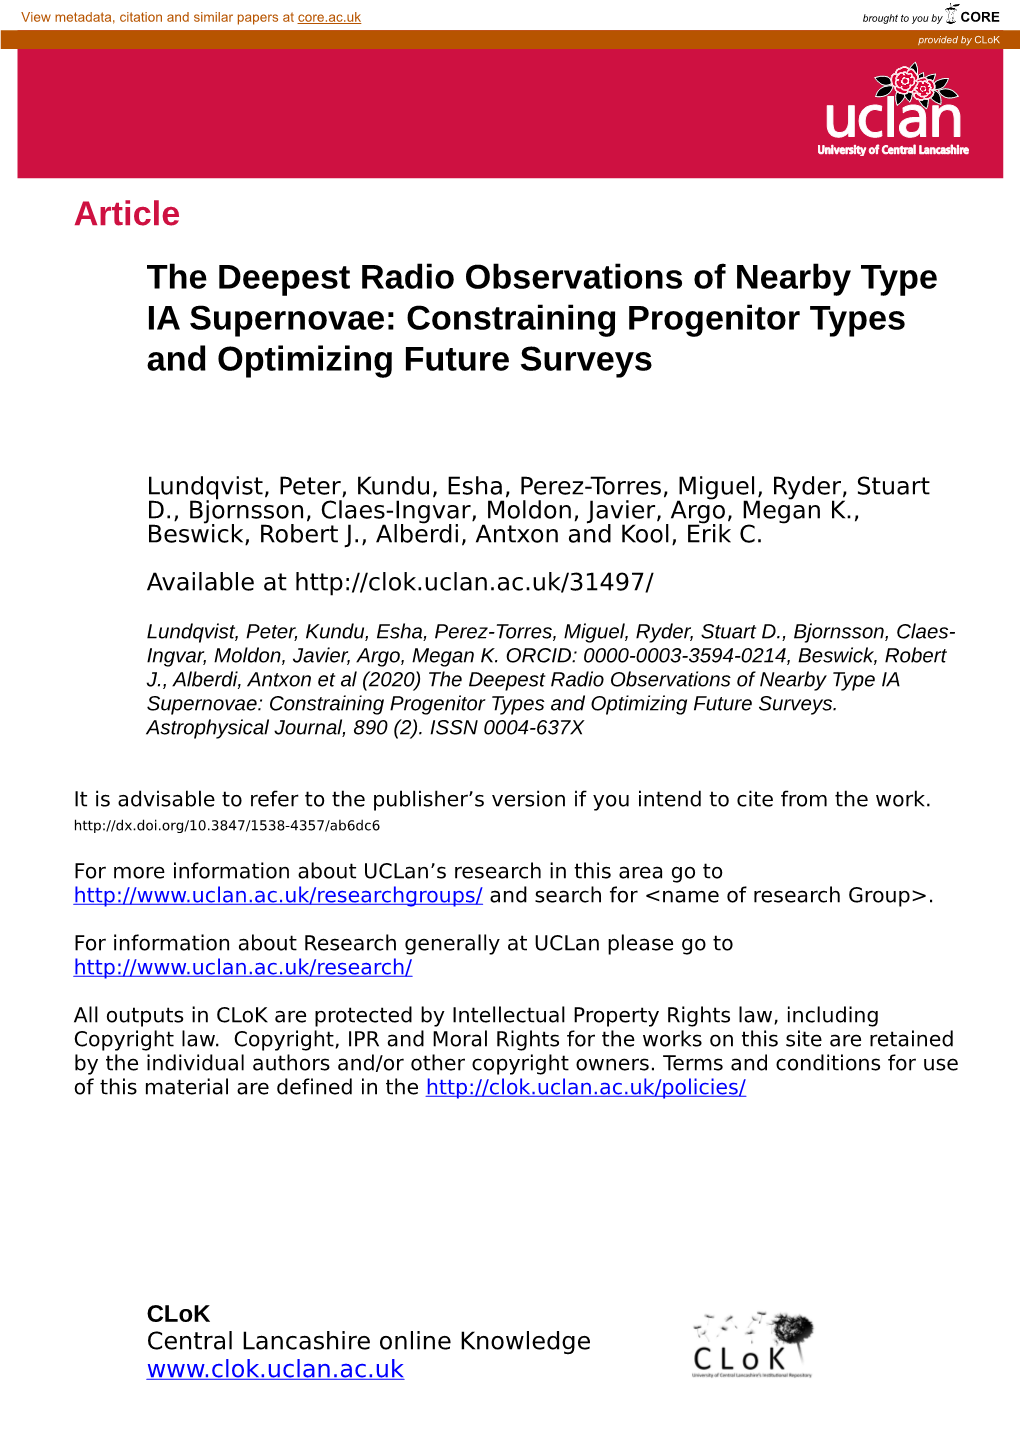 The Deepest Radio Observations of Nearby Sne Ia: Constraining Progenitor Types and Optimizing Future Surveys